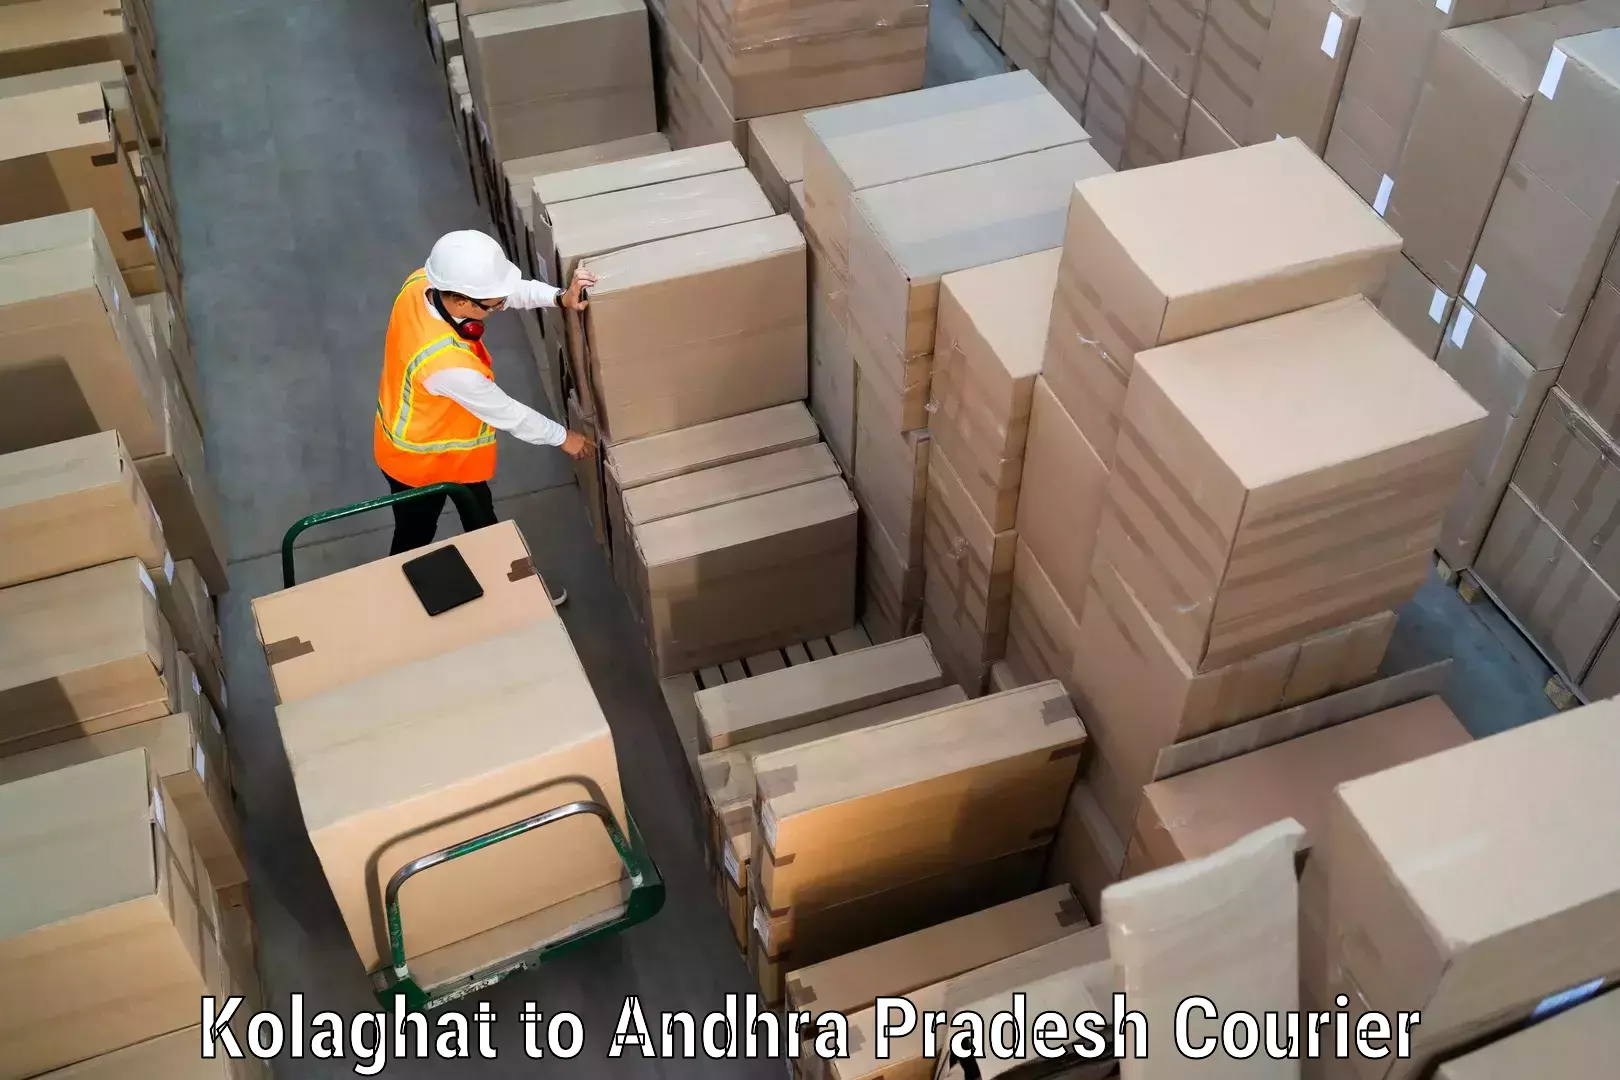 Easy access courier services Kolaghat to Rambilli